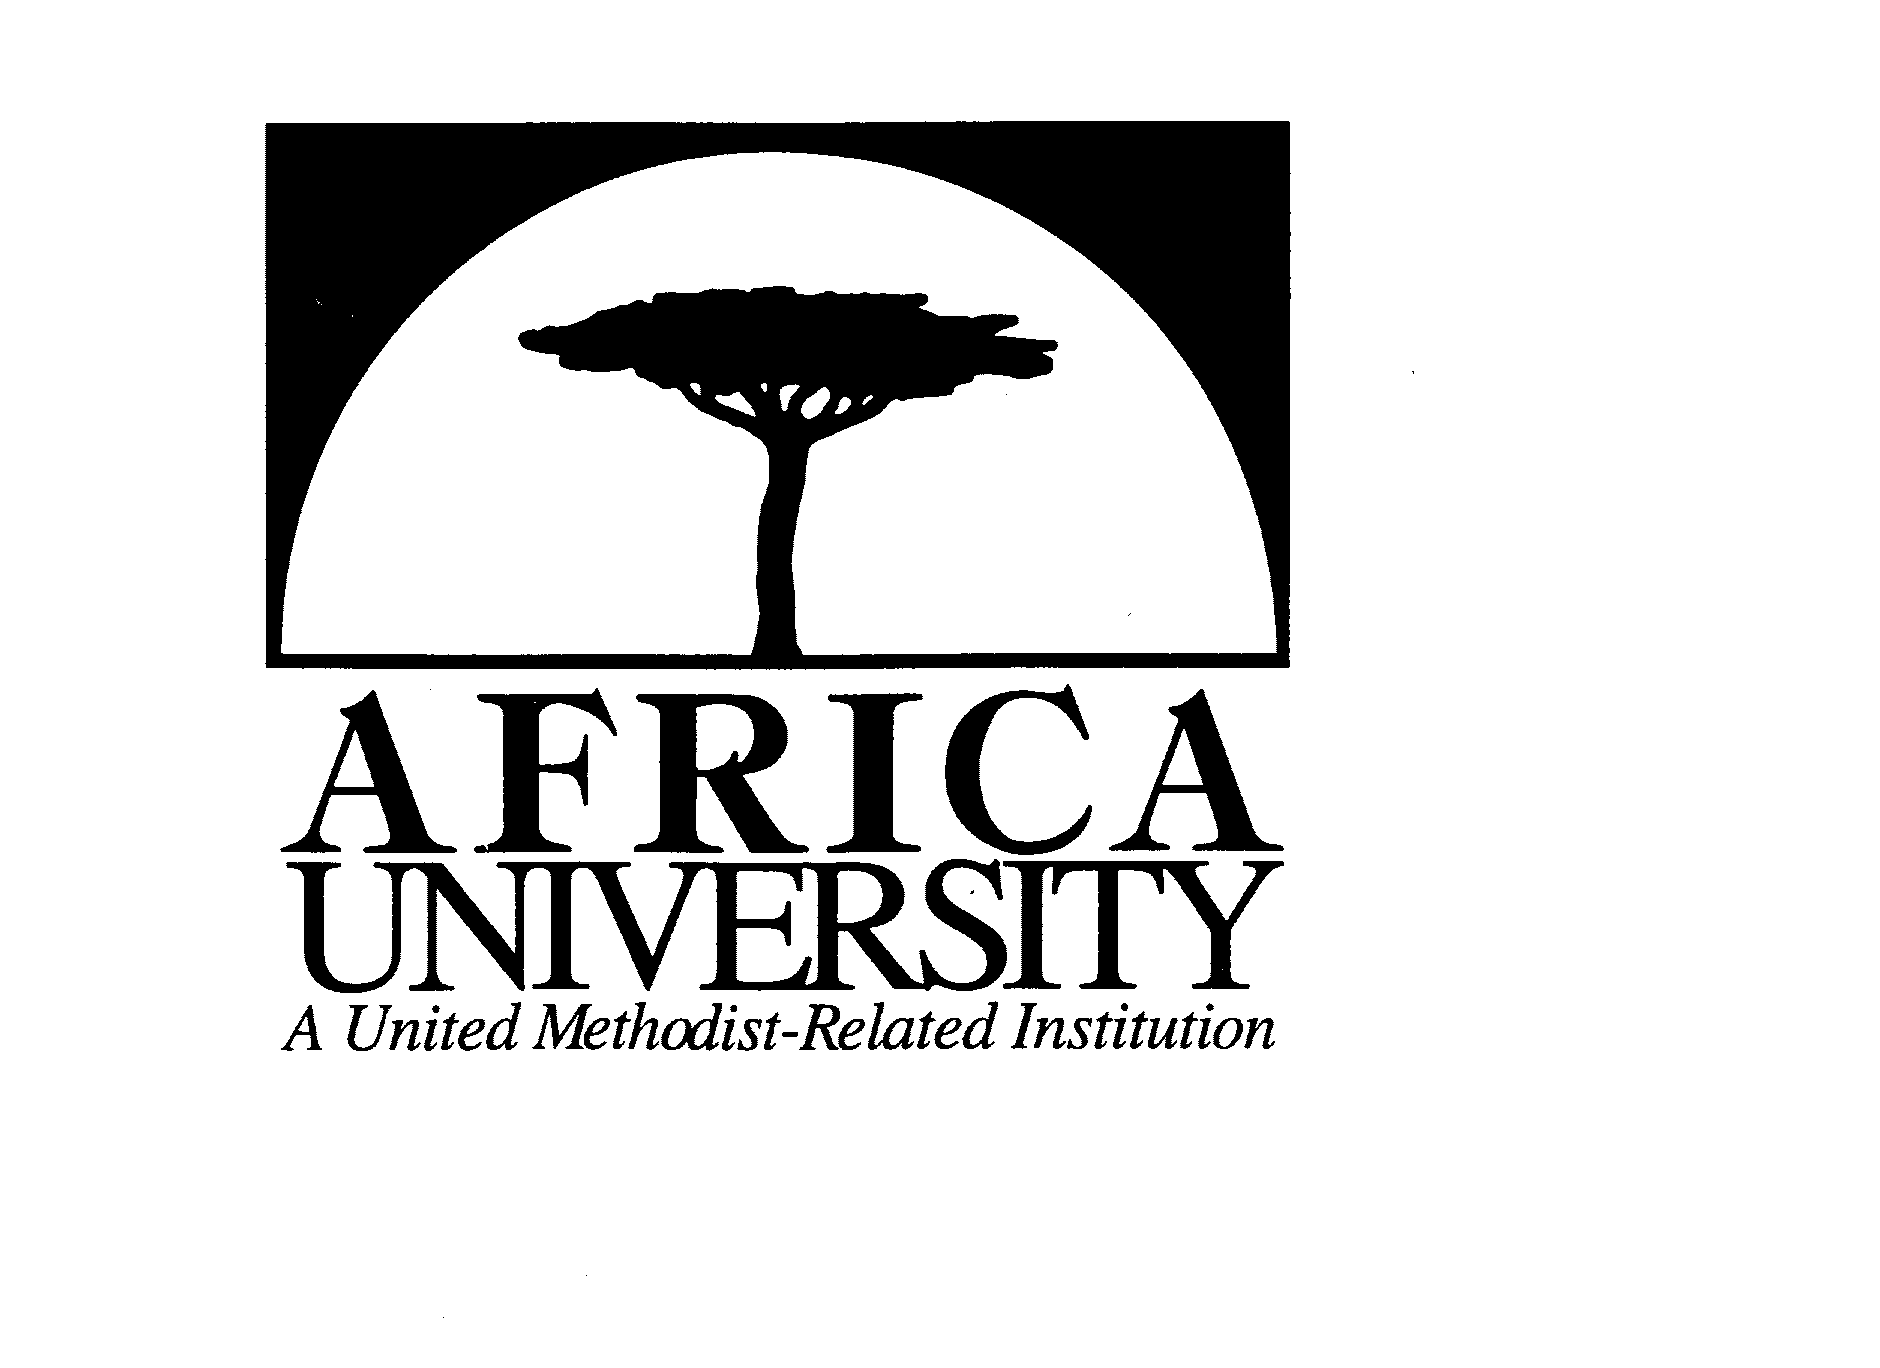  AFRICA UNIVERSITY A UNITED METHODIST-RELATED INSTITUTION